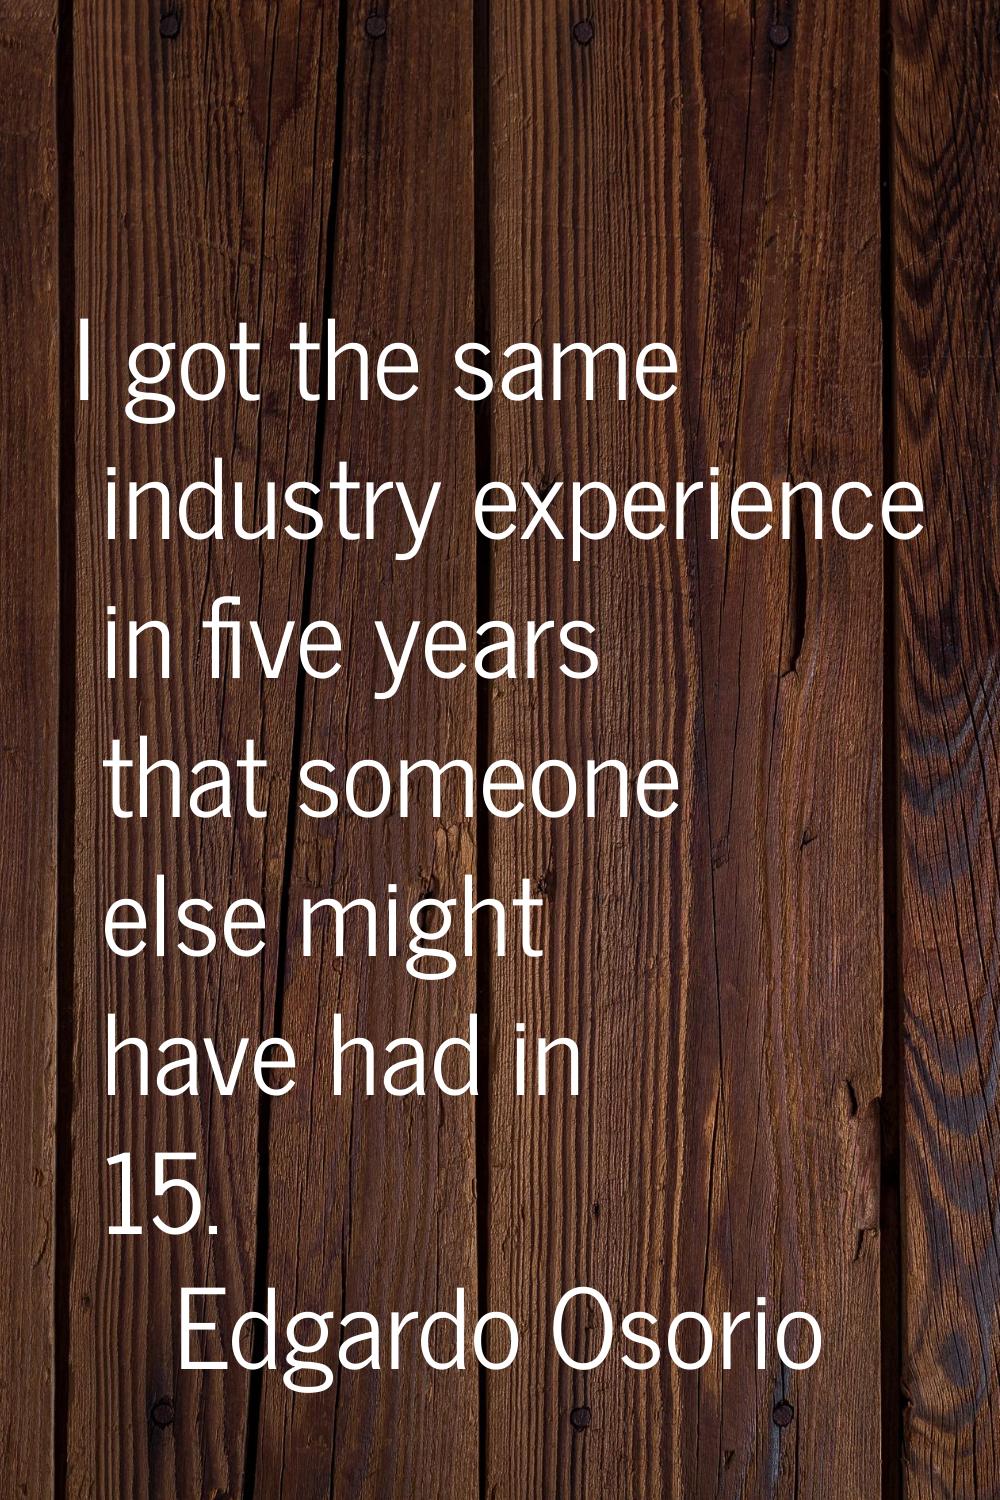 I got the same industry experience in five years that someone else might have had in 15.